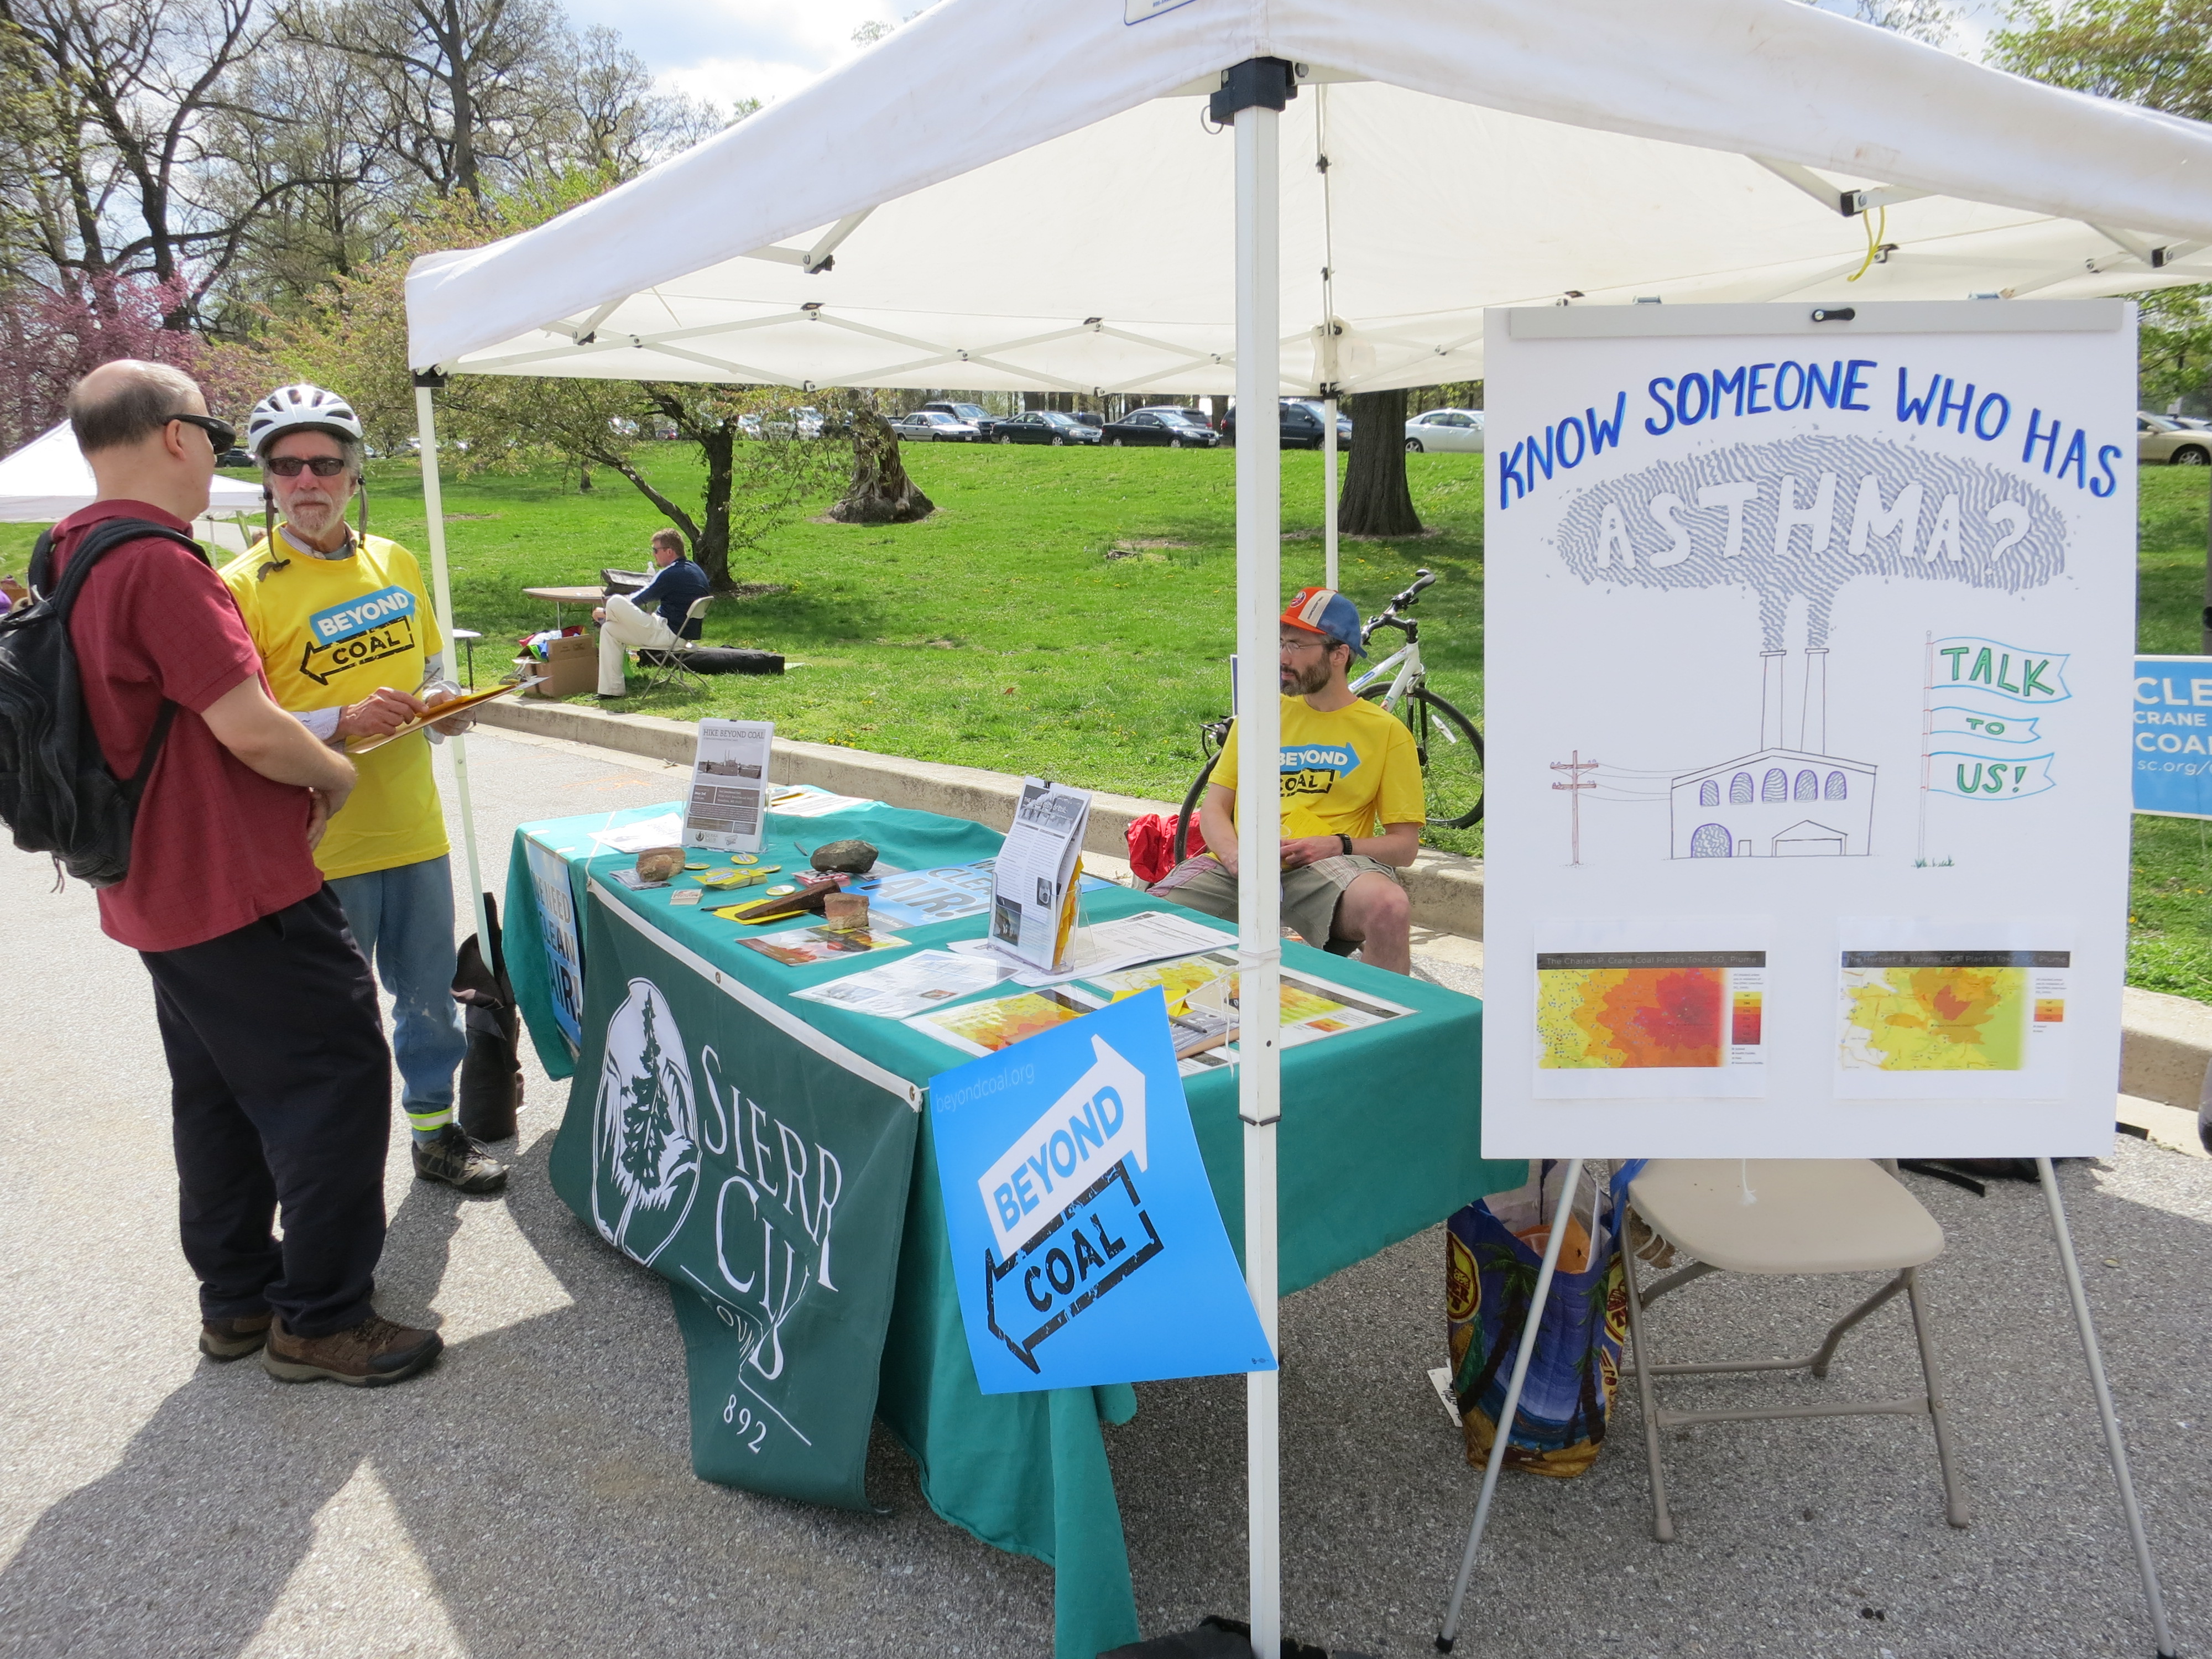 Members of the Sierra Club engage with the public to educate them about the health risks associated with smog pollution